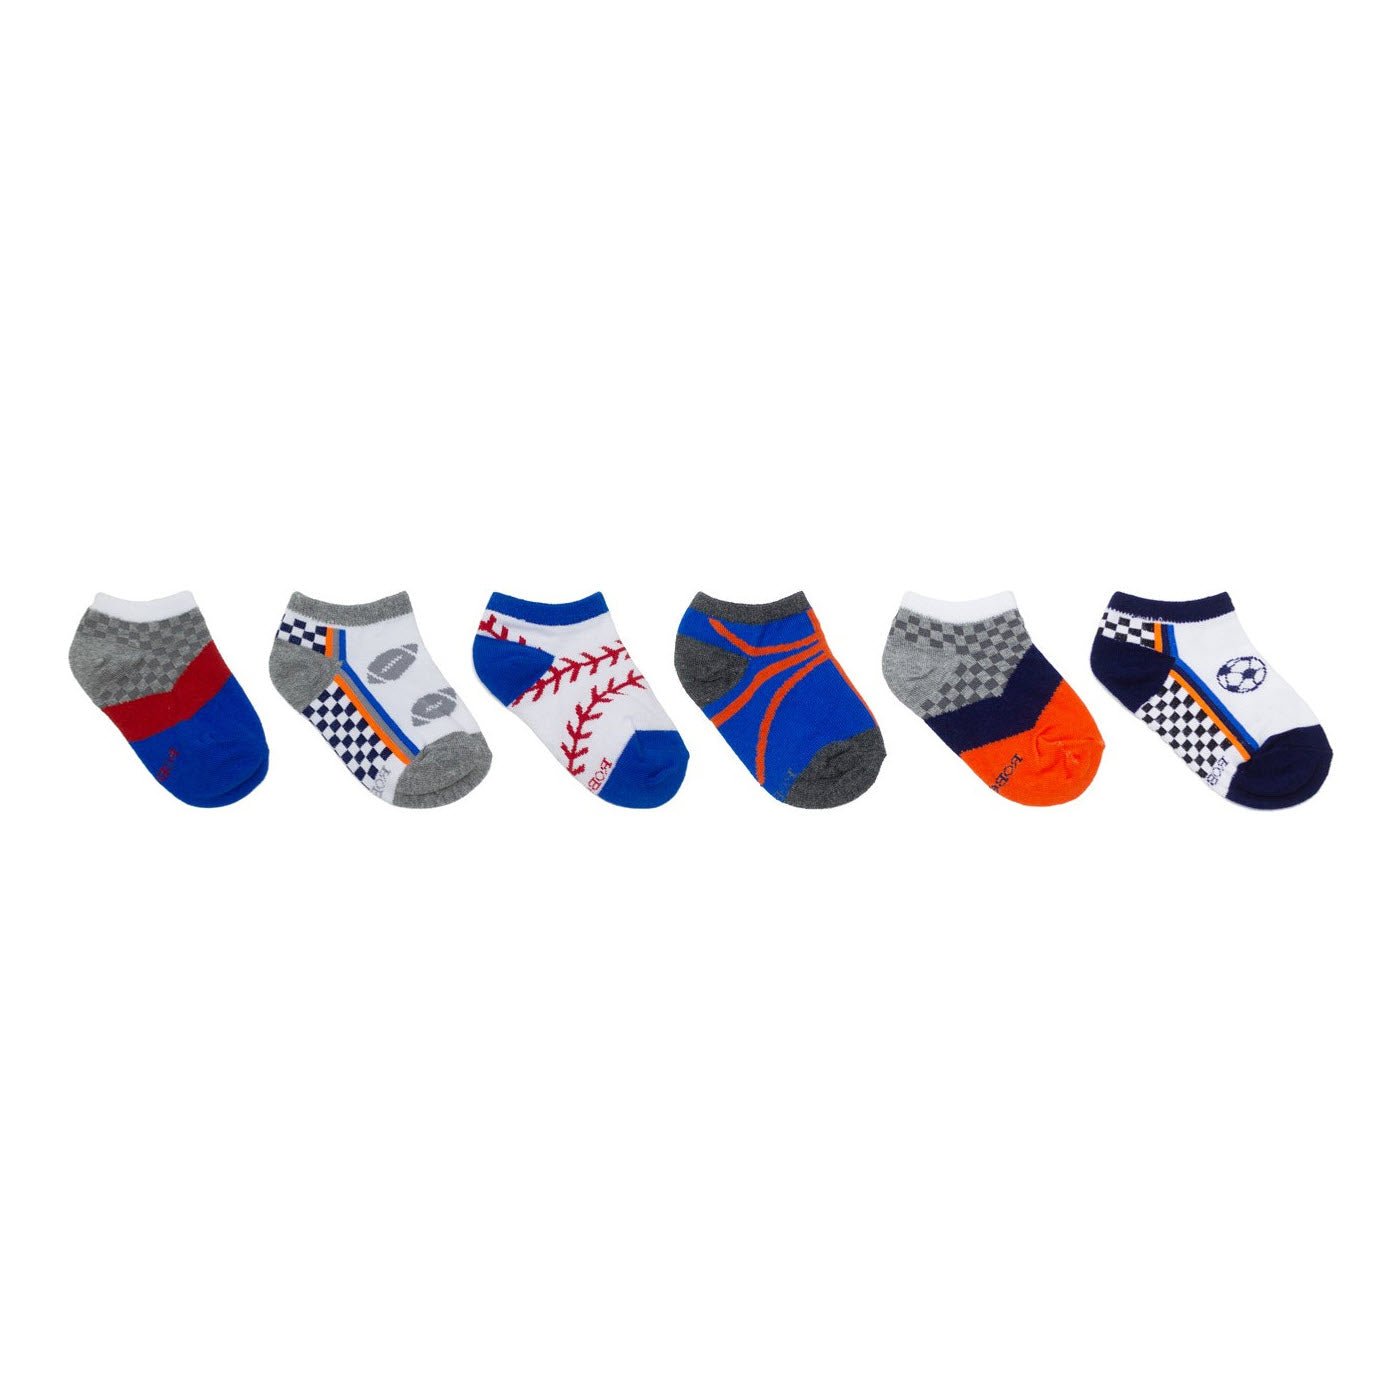 Eight pairs of Robeez no show children's sports socks, each with unique designs including stripes, basketballs, and baseballs, arranged in a row on a white background.